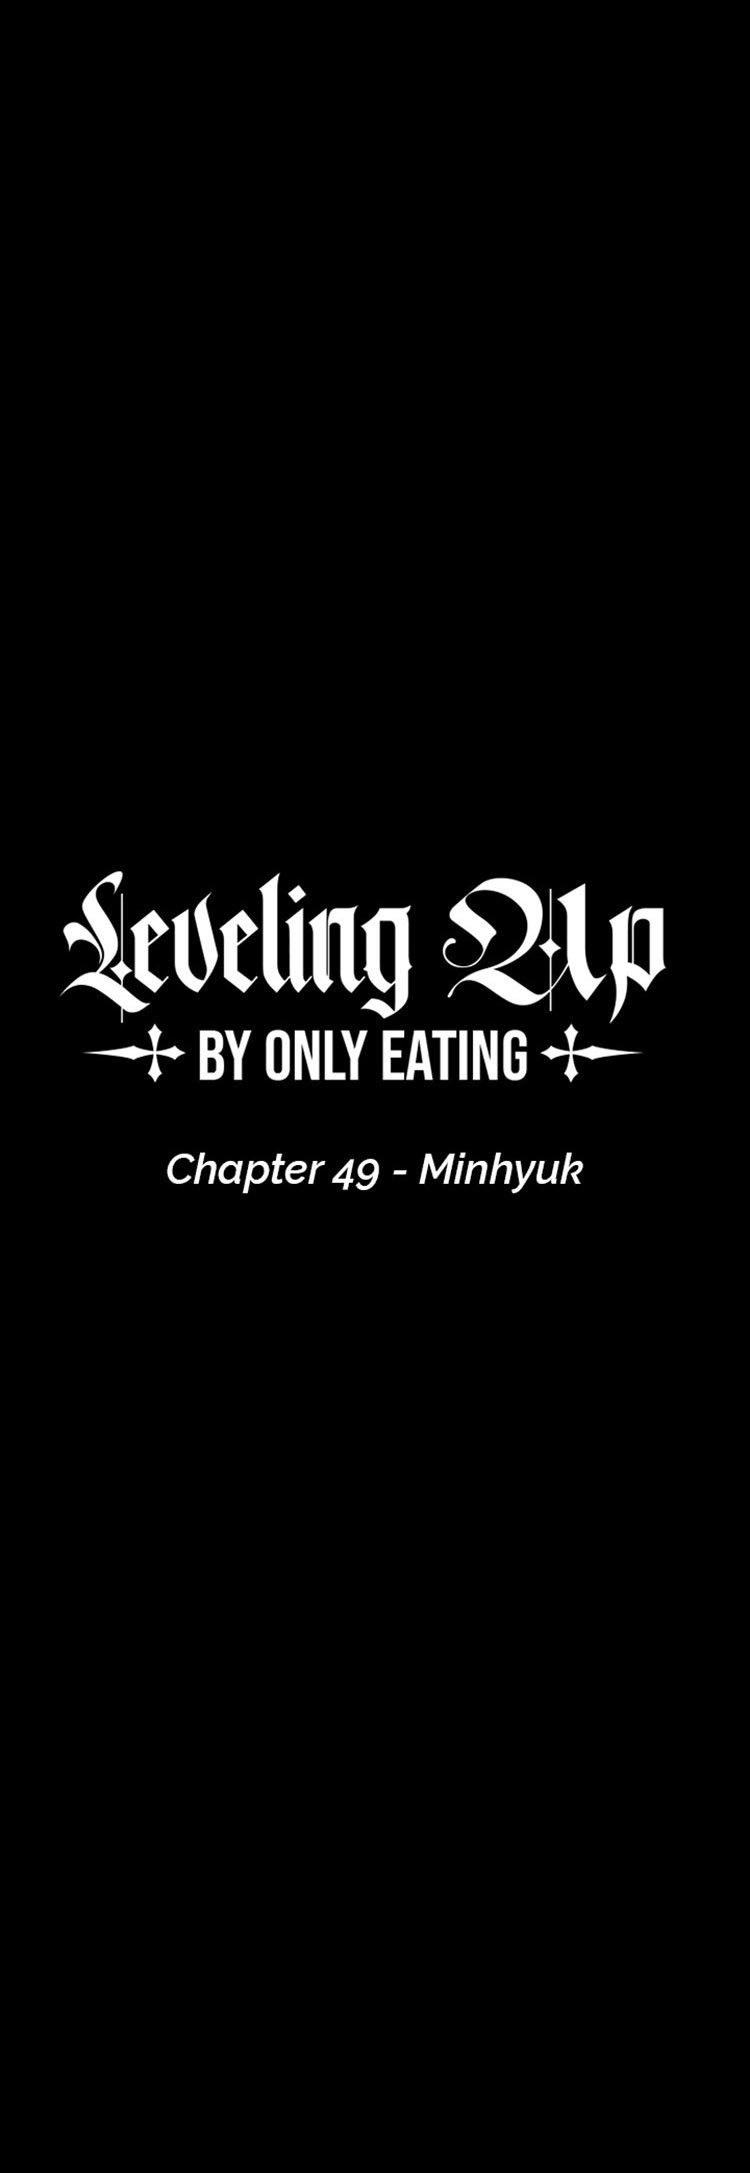 Leveling Up, by Only Eating! - Chapter 49 Page 7